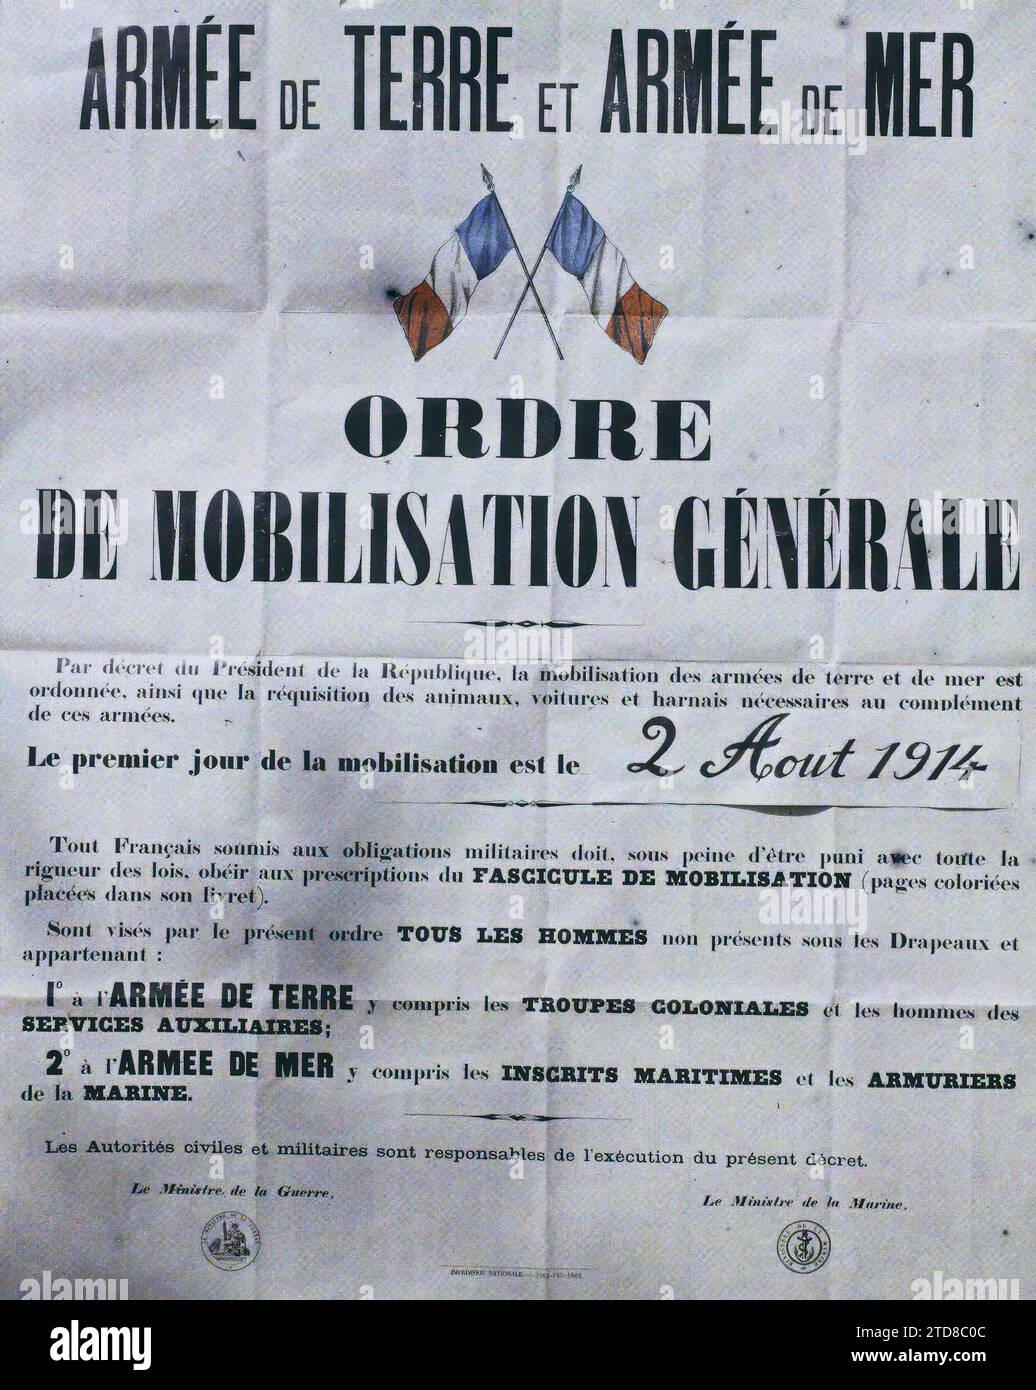 Paris, France Poster of the general mobilization of August 2, 1914, HD, Registration, information, First World War, Society, exists in high definition, Poster, Mobilization, demobilization, Flag, Army, Paris, 11/04/1918 - 11/04/1918, Léon, Auguste, photographer, Autochrome, photo, Glass, Autochrome, photo, Positive, Vertical, Size 9 x 12 cm Stock Photo